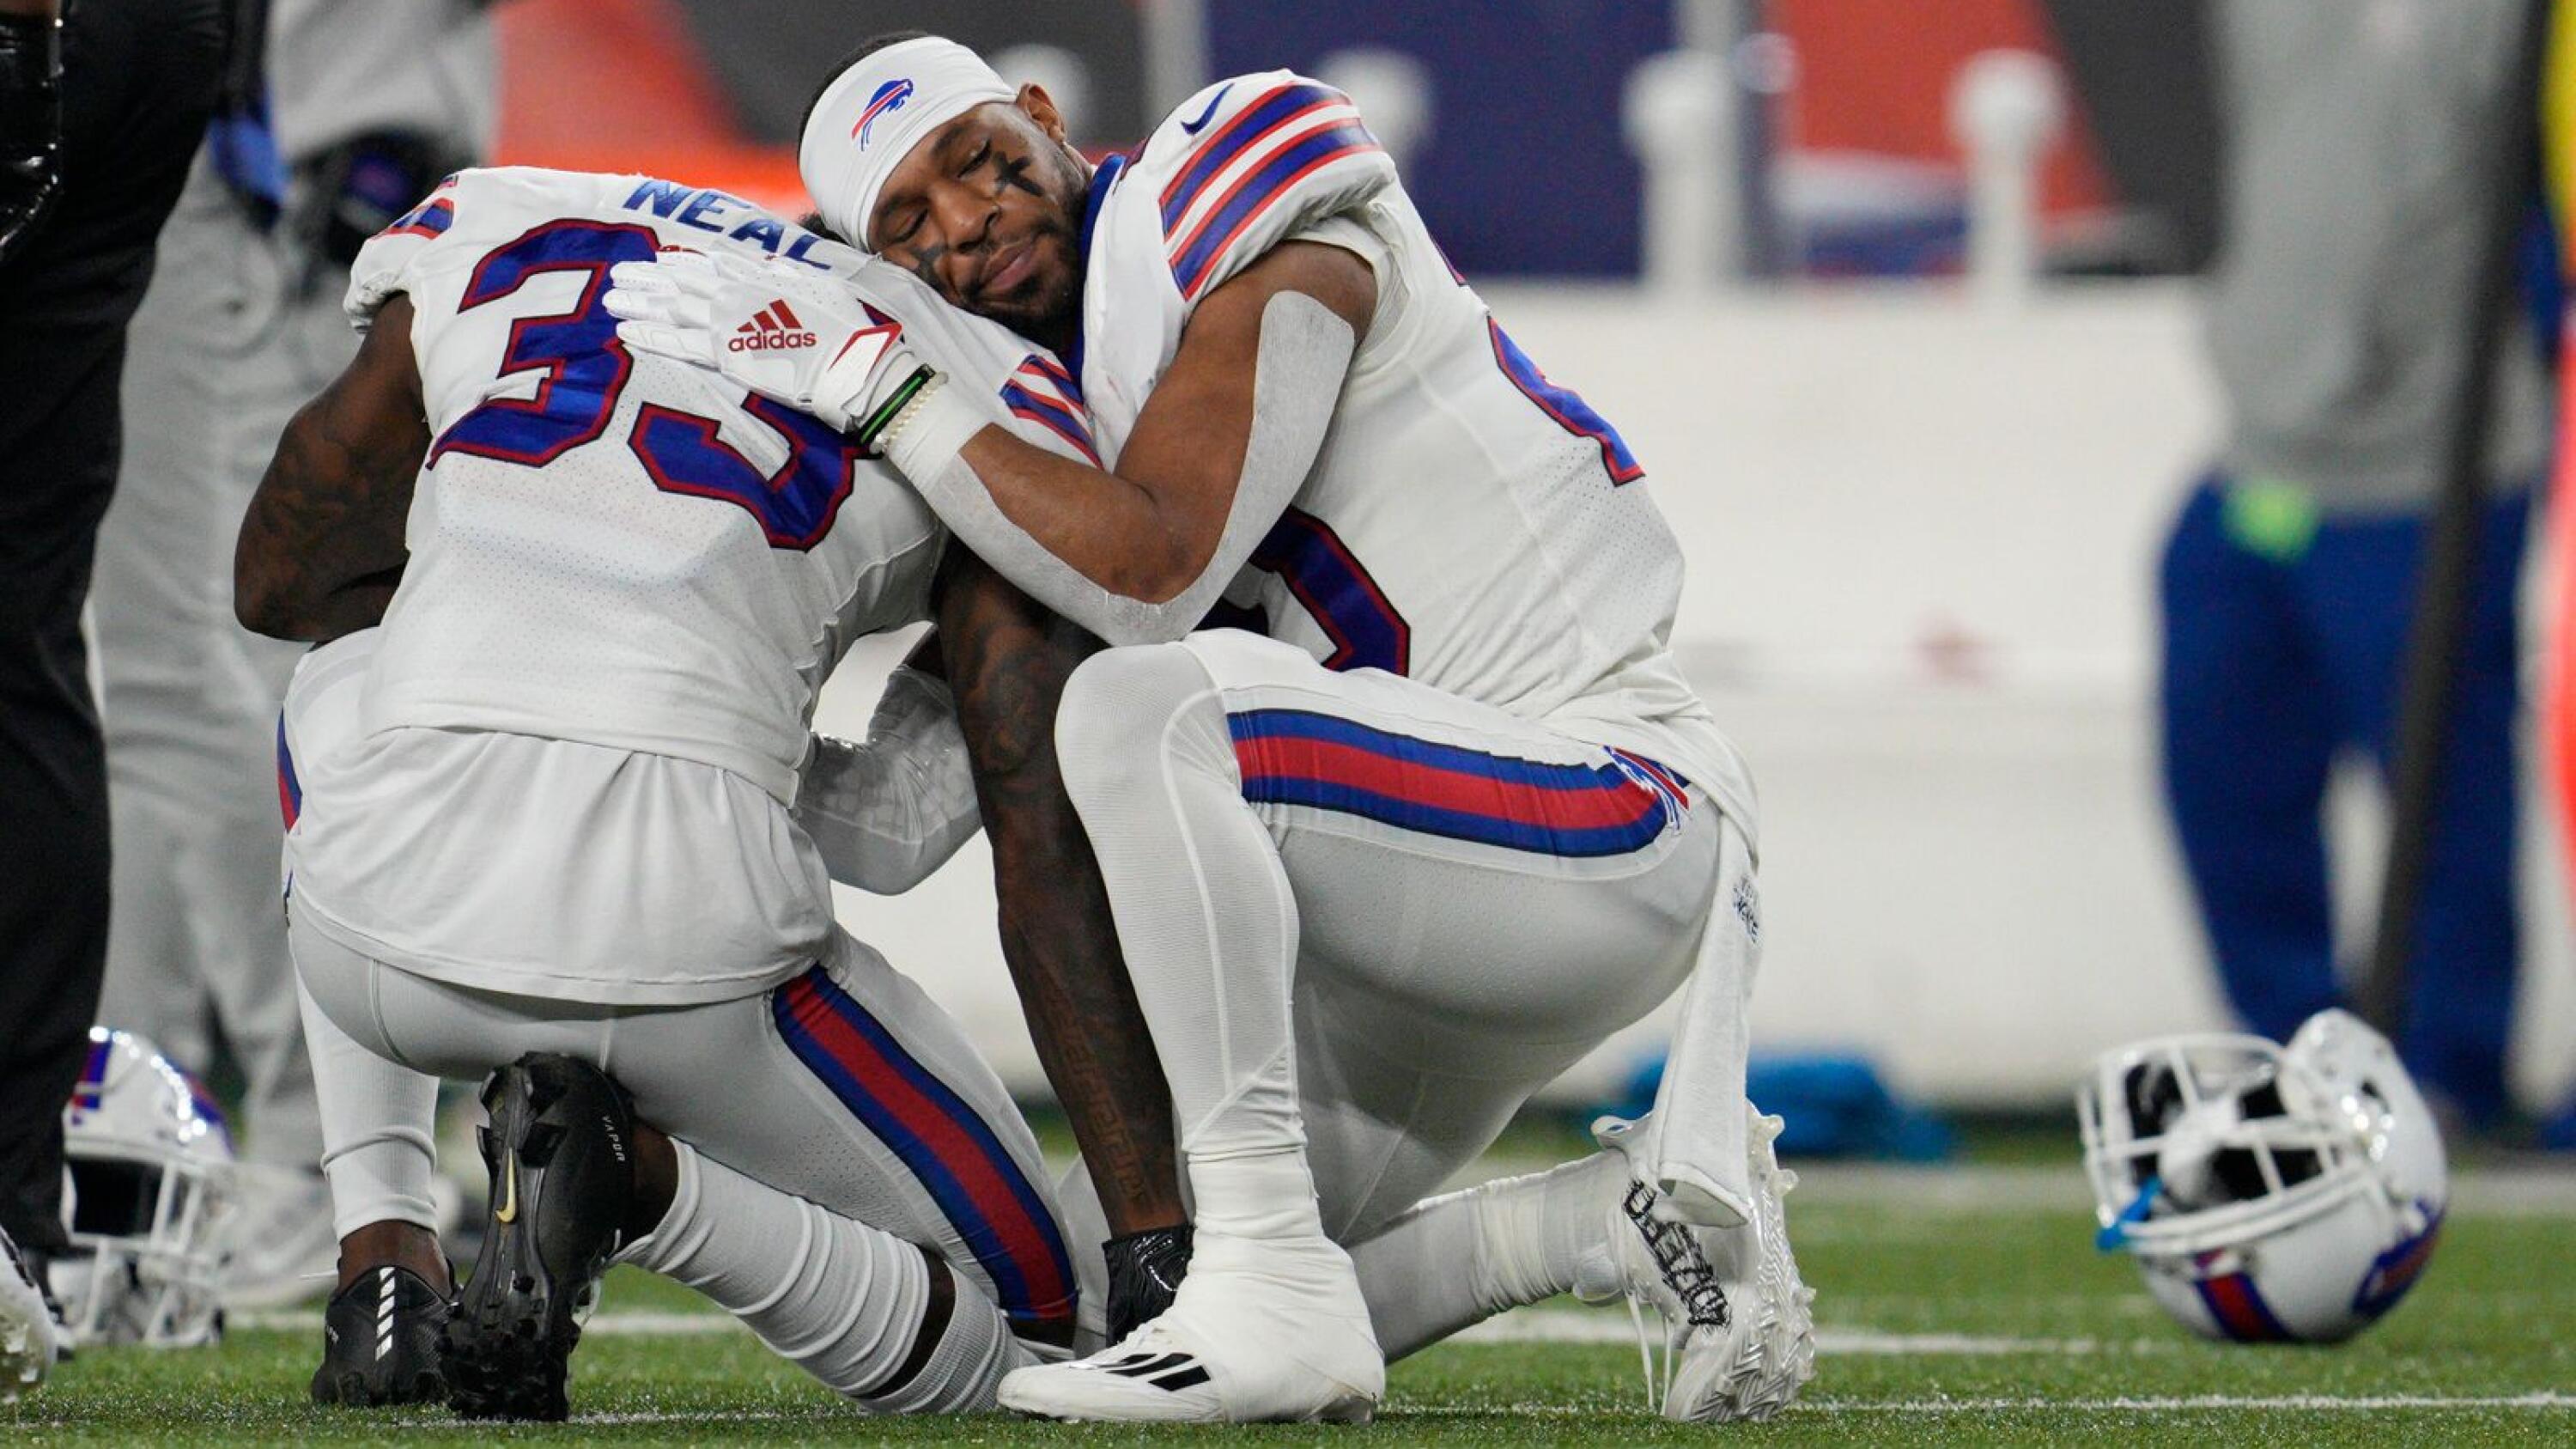 Bills' Hamlin in critical condition after collapse on field, game vs.  Bengals called off indefinitely